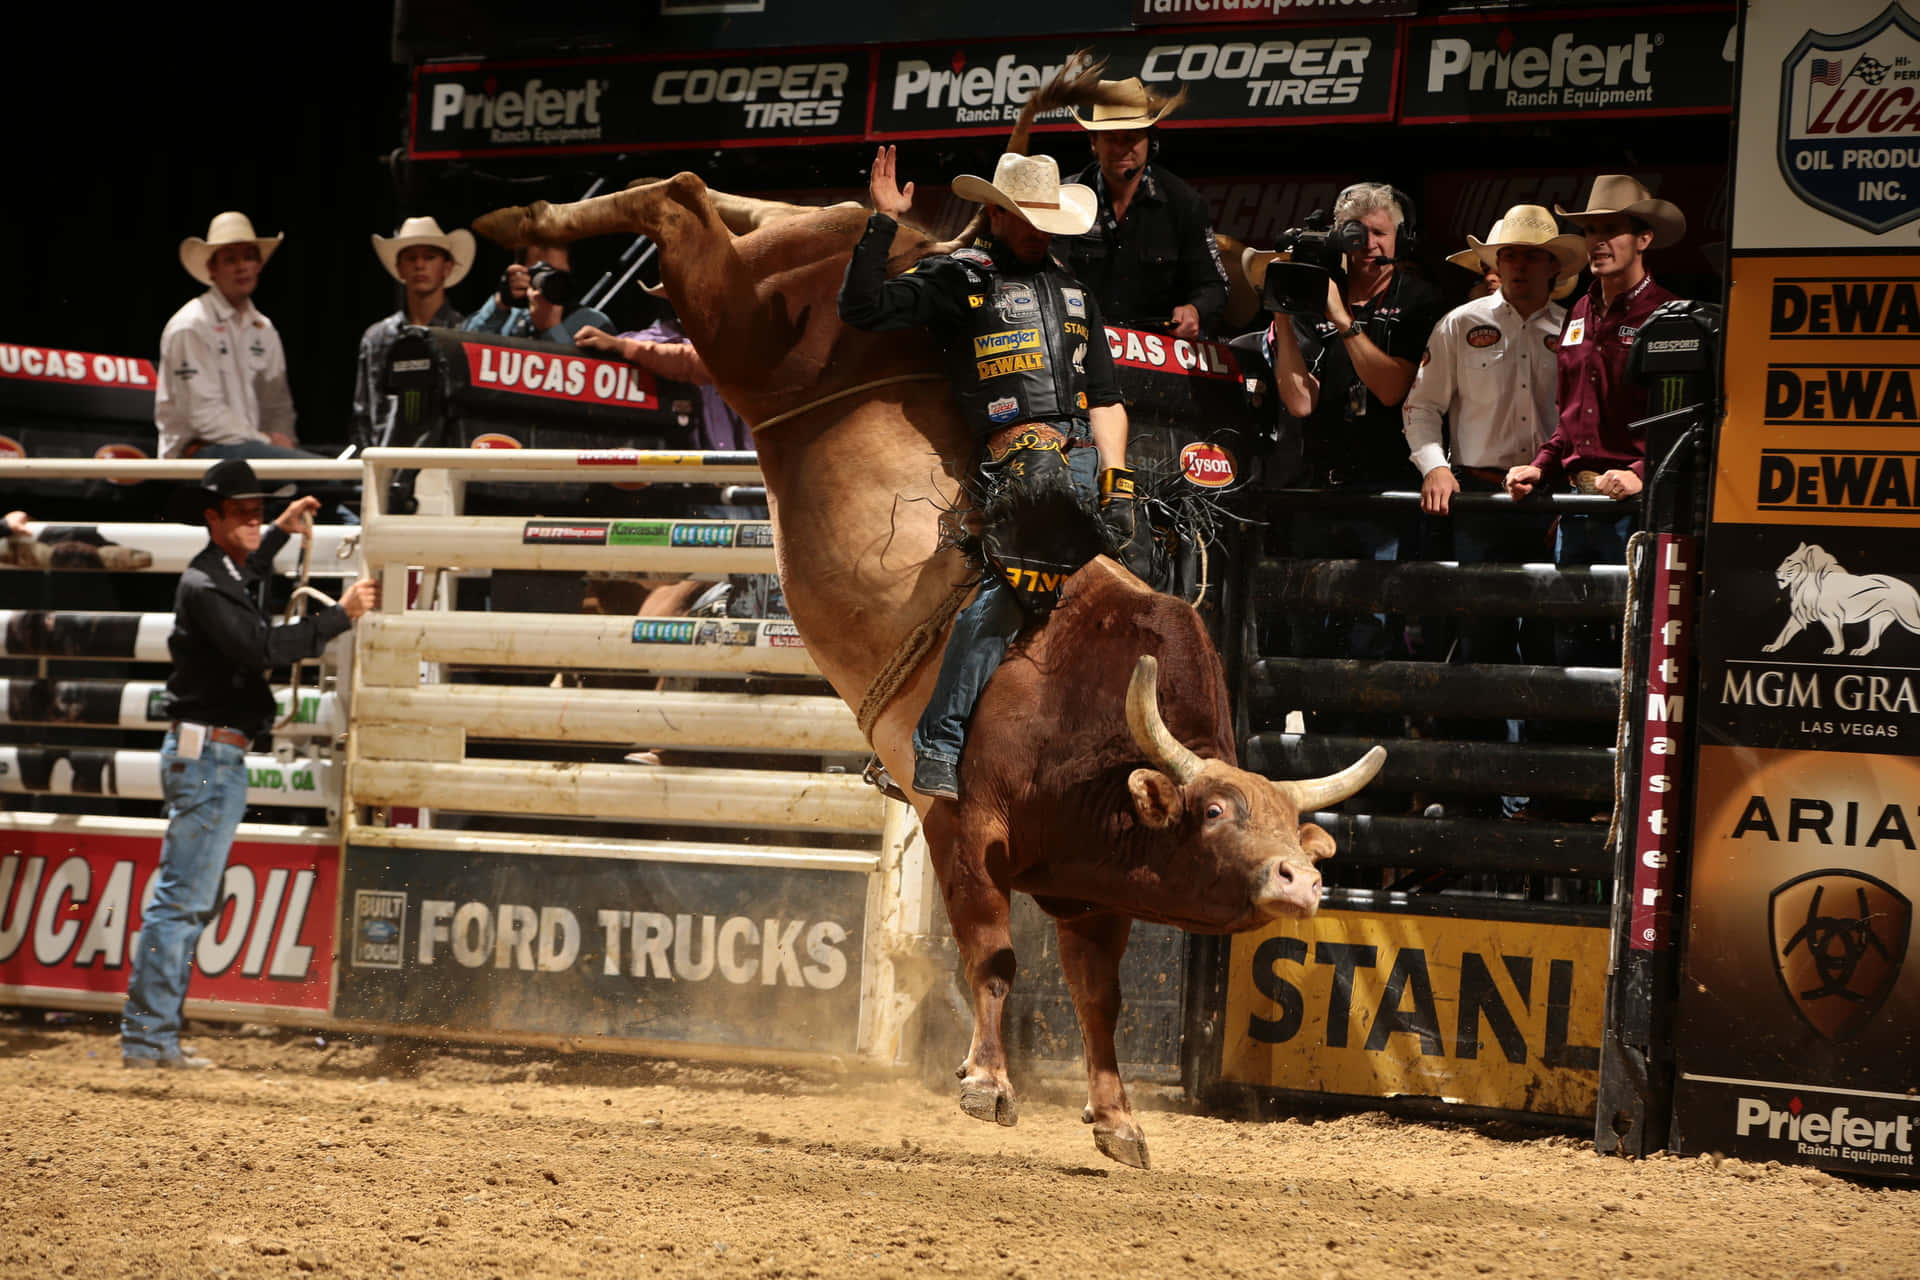 Experienced Bull Rider Sees Sparks Fly